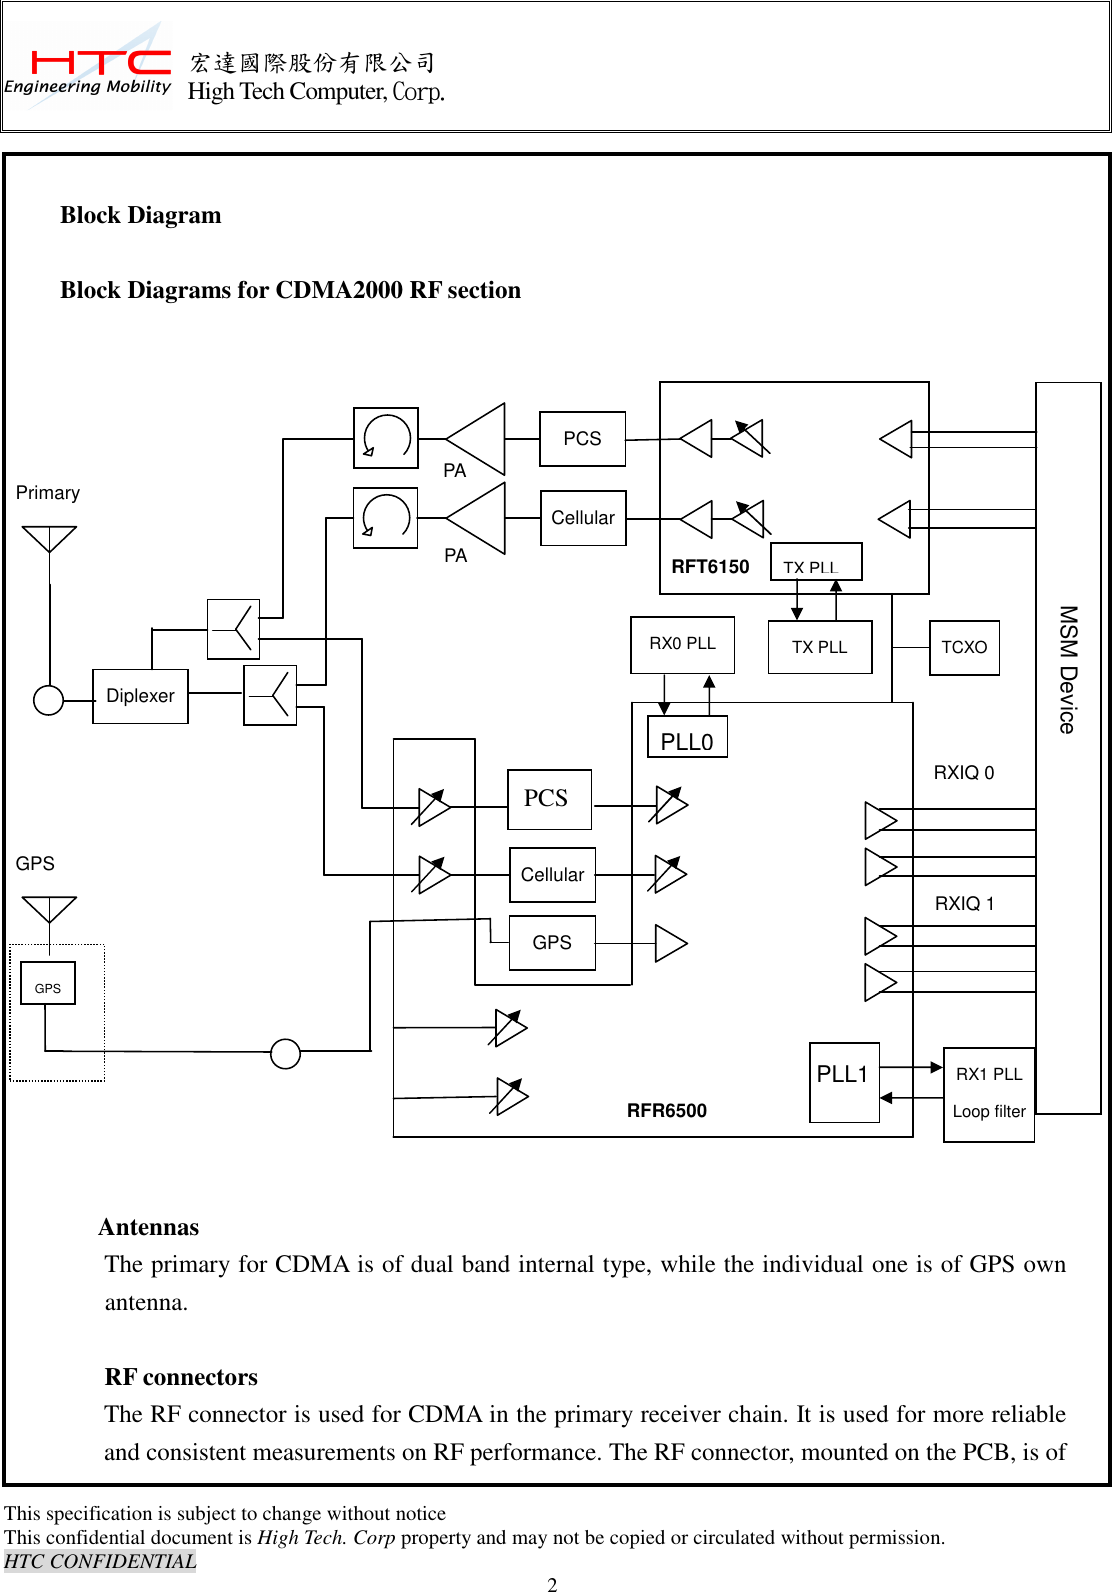      This specification is subject to change without notice This confidential document is High Tech. Corp property and may not be copied or circulated without permission. HTC CONFIDENTIAL                                    2 宏達國際股份有限公司 High Tech Computer, Corp.  Block Diagram    Block Diagrams for CDMA2000 RF section          Antennas The primary for CDMA is of dual band internal type, while the individual one is of GPS own antenna.      RF connectors The RF connector is used for CDMA in the primary receiver chain. It is used for more reliable and consistent measurements on RF performance. The RF connector, mounted on the PCB, is of RX1 PLL Loop filter RX0 PLL  TX PLL  Diplexer Cellular  GPS  PCS  Cellular  TCXO PLL1 PLL0 TX PLL PA PA MSM Device Primary  RXIQ 0 RXIQ 1 RFT6150 RFR6500 GPS  PCS GPS 